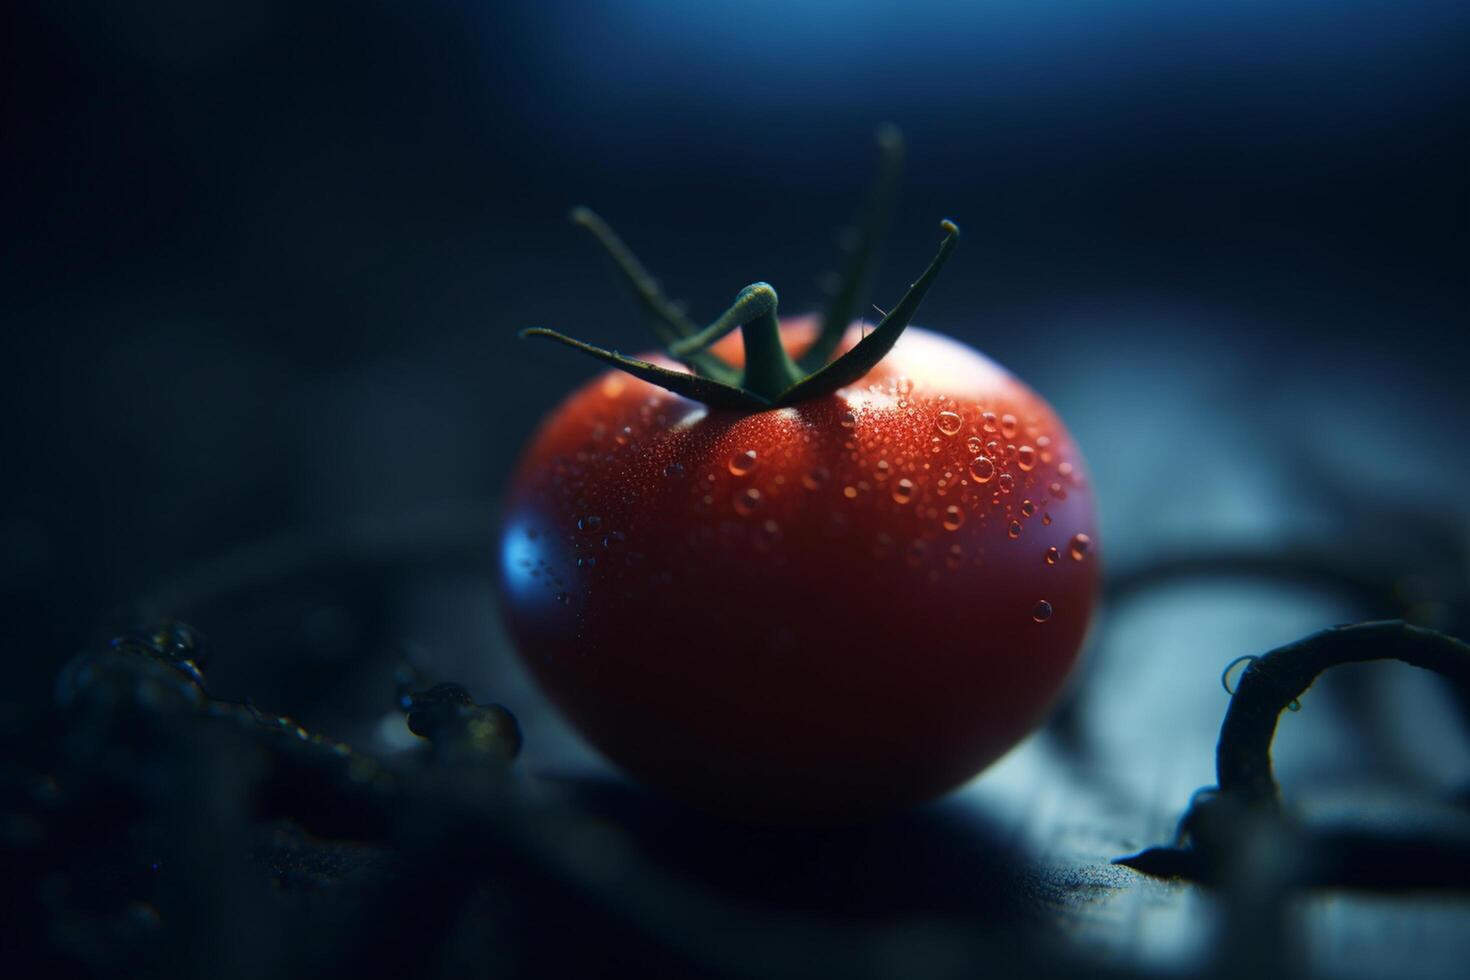 Glowing Tomatoes Cultivation under Artificial UV Light for Optimal Growth and Nutrition photo